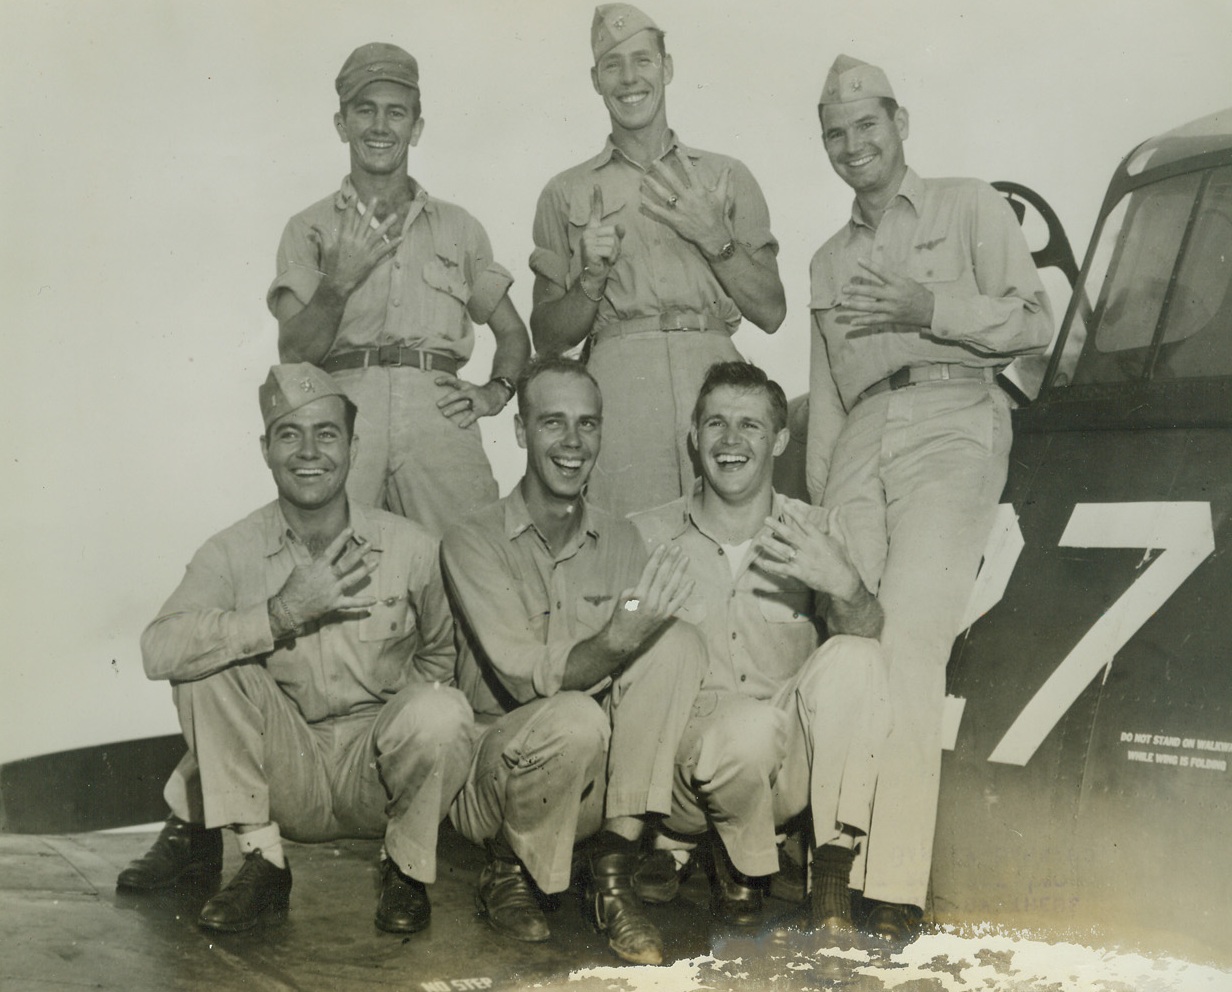 They Downed 28 Jap Planes, 7/6/1944. Pacific Fleet – Twenty-eight Jap planes were bagged by these members of famous “Ripper Squadron” in a singl run off Iwo Jima, June 24.  Top row, left to right: Lt. (JG) Barney Barnard, Donna, Tex., who bagged 5; Ens. W.B. Webb, Wichita Falls, Tex., 6; Comdr. William A. Dean, Coronado, Calif., 4.  Bottom row, left to right: Lt (JG) Merriwell W. Vineyard, Whitewright, Tex., 4; Lt. (JG) E.C. Gargreaves, Brimfield, Tex., 4; and Lt. Russell L. Reisener, Redwood City, Calif., 5.  The squadron has shot down 120 planes in combat, destroyed more than 120 on ground. Credit line (ACME);